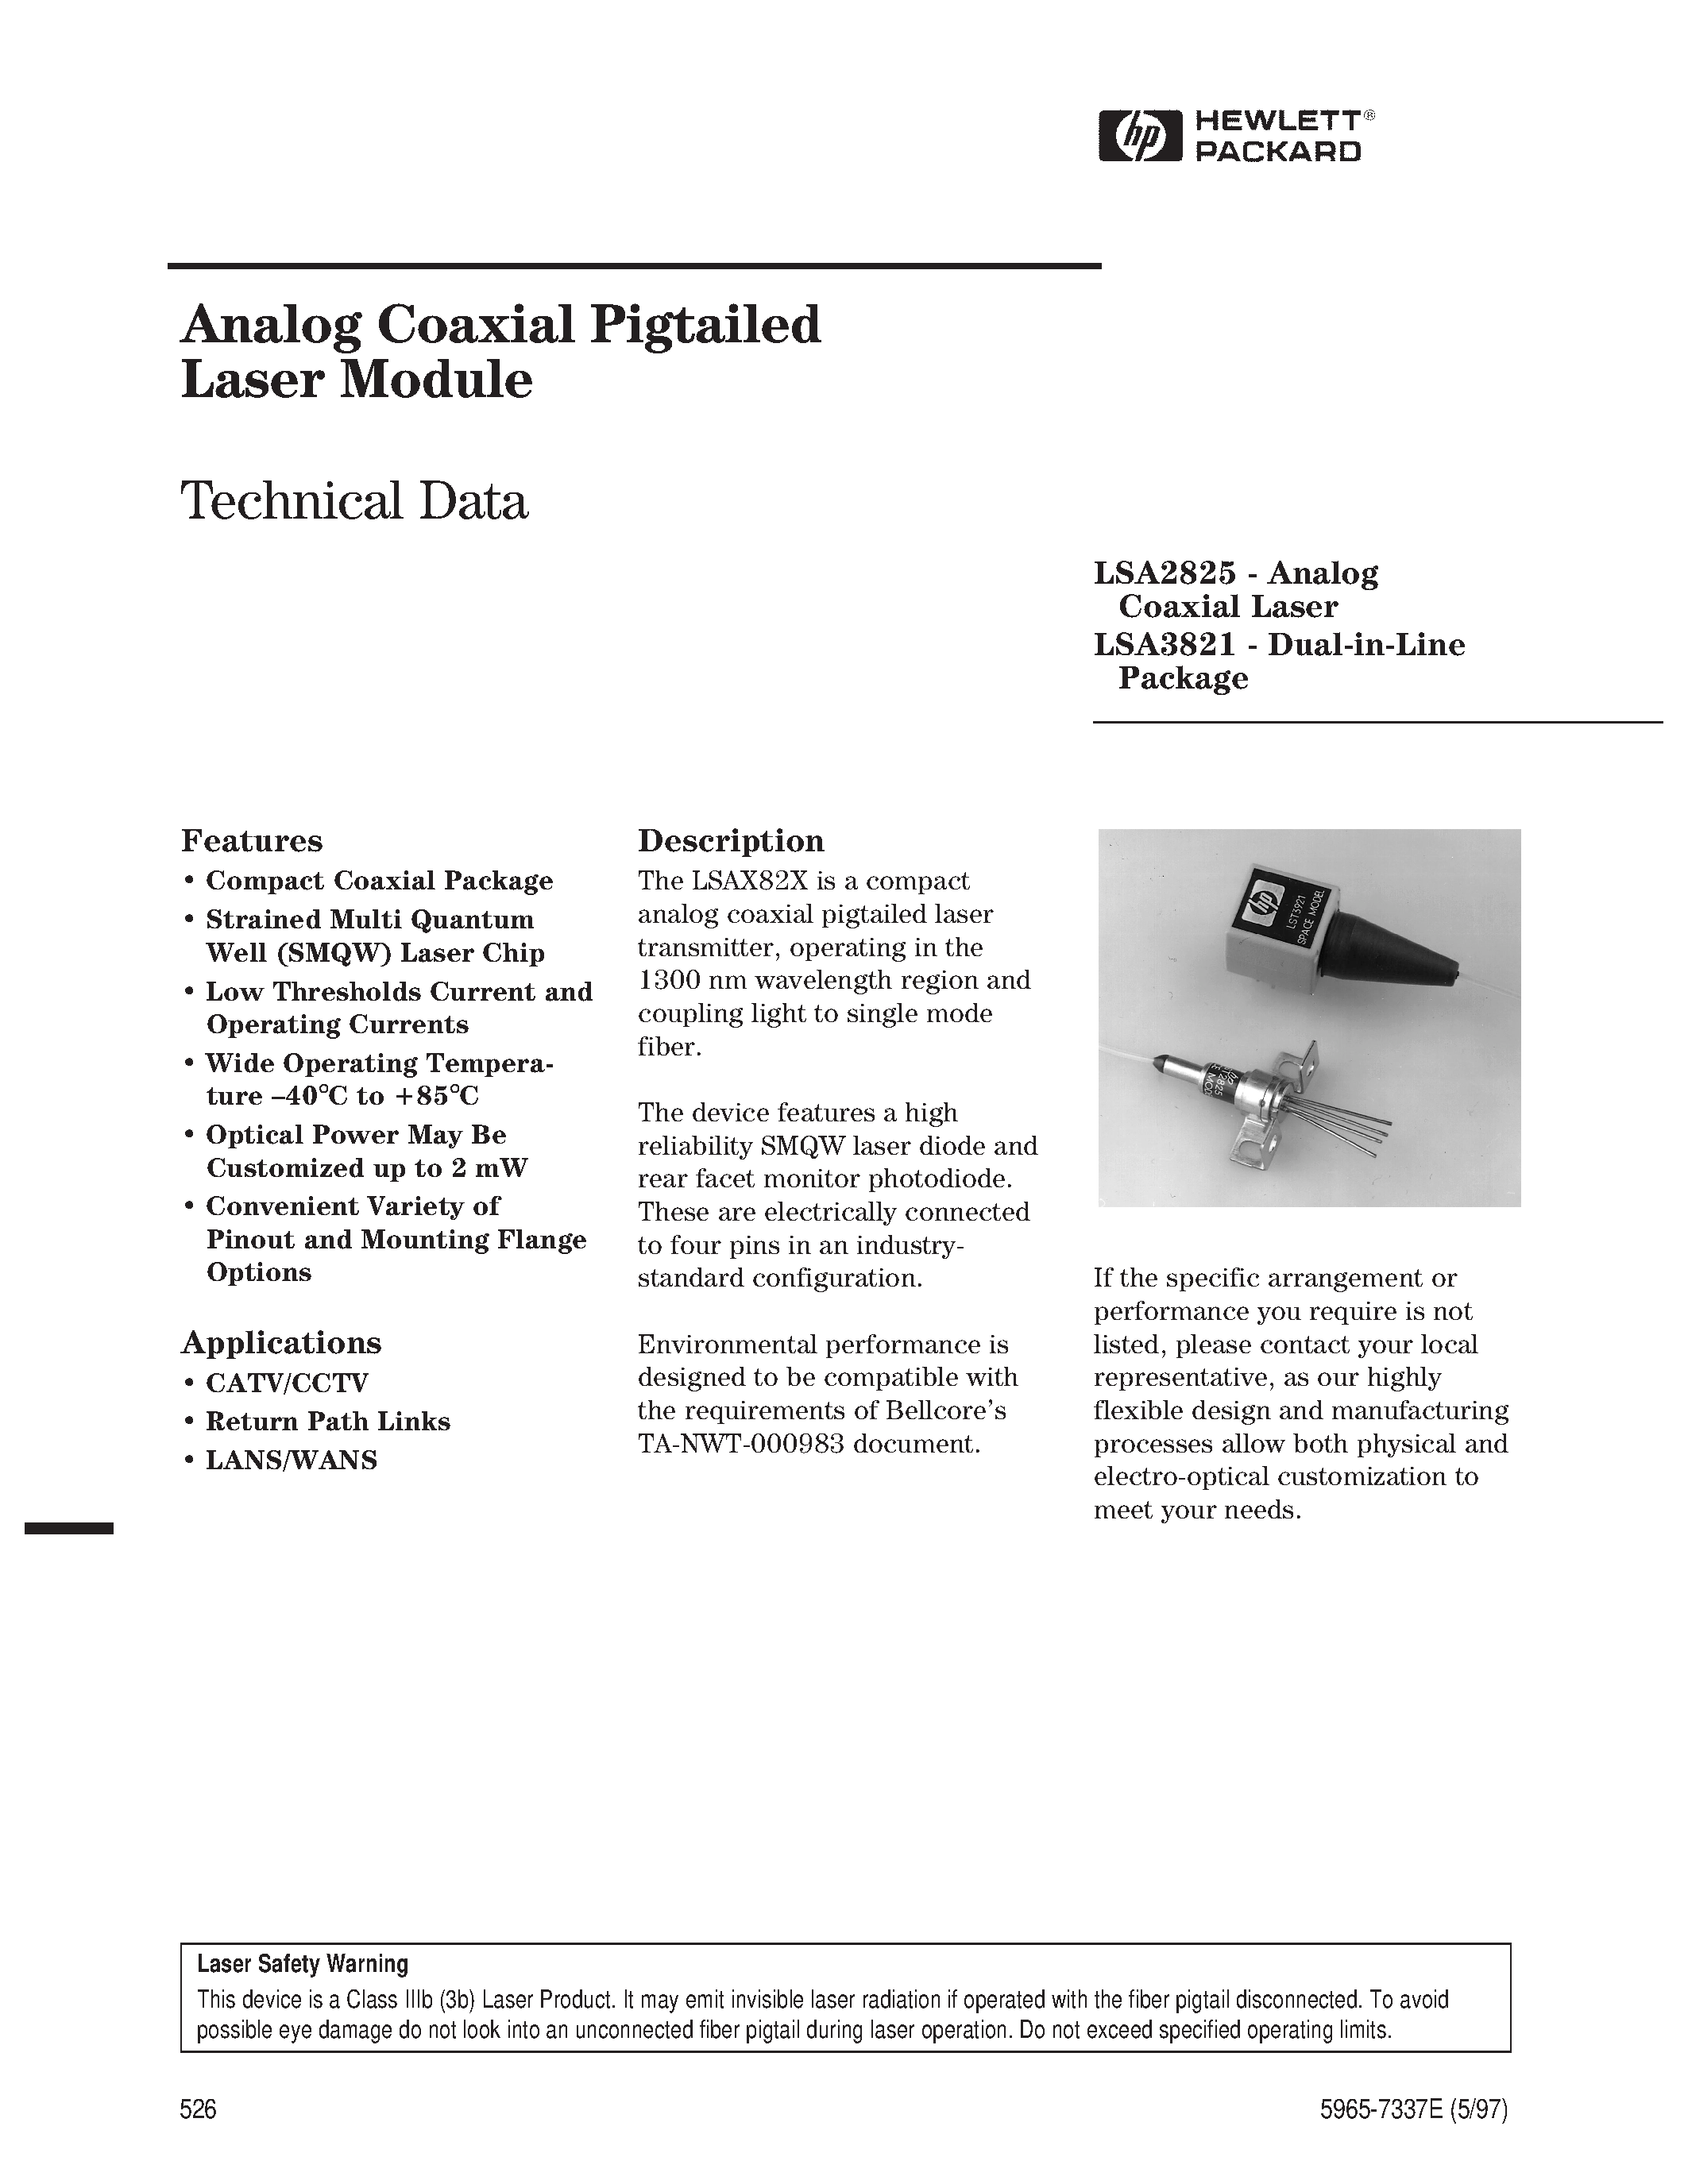 Datasheet LSA2825-T-US - Analog Coaxial Pigtailed Laser Module page 1